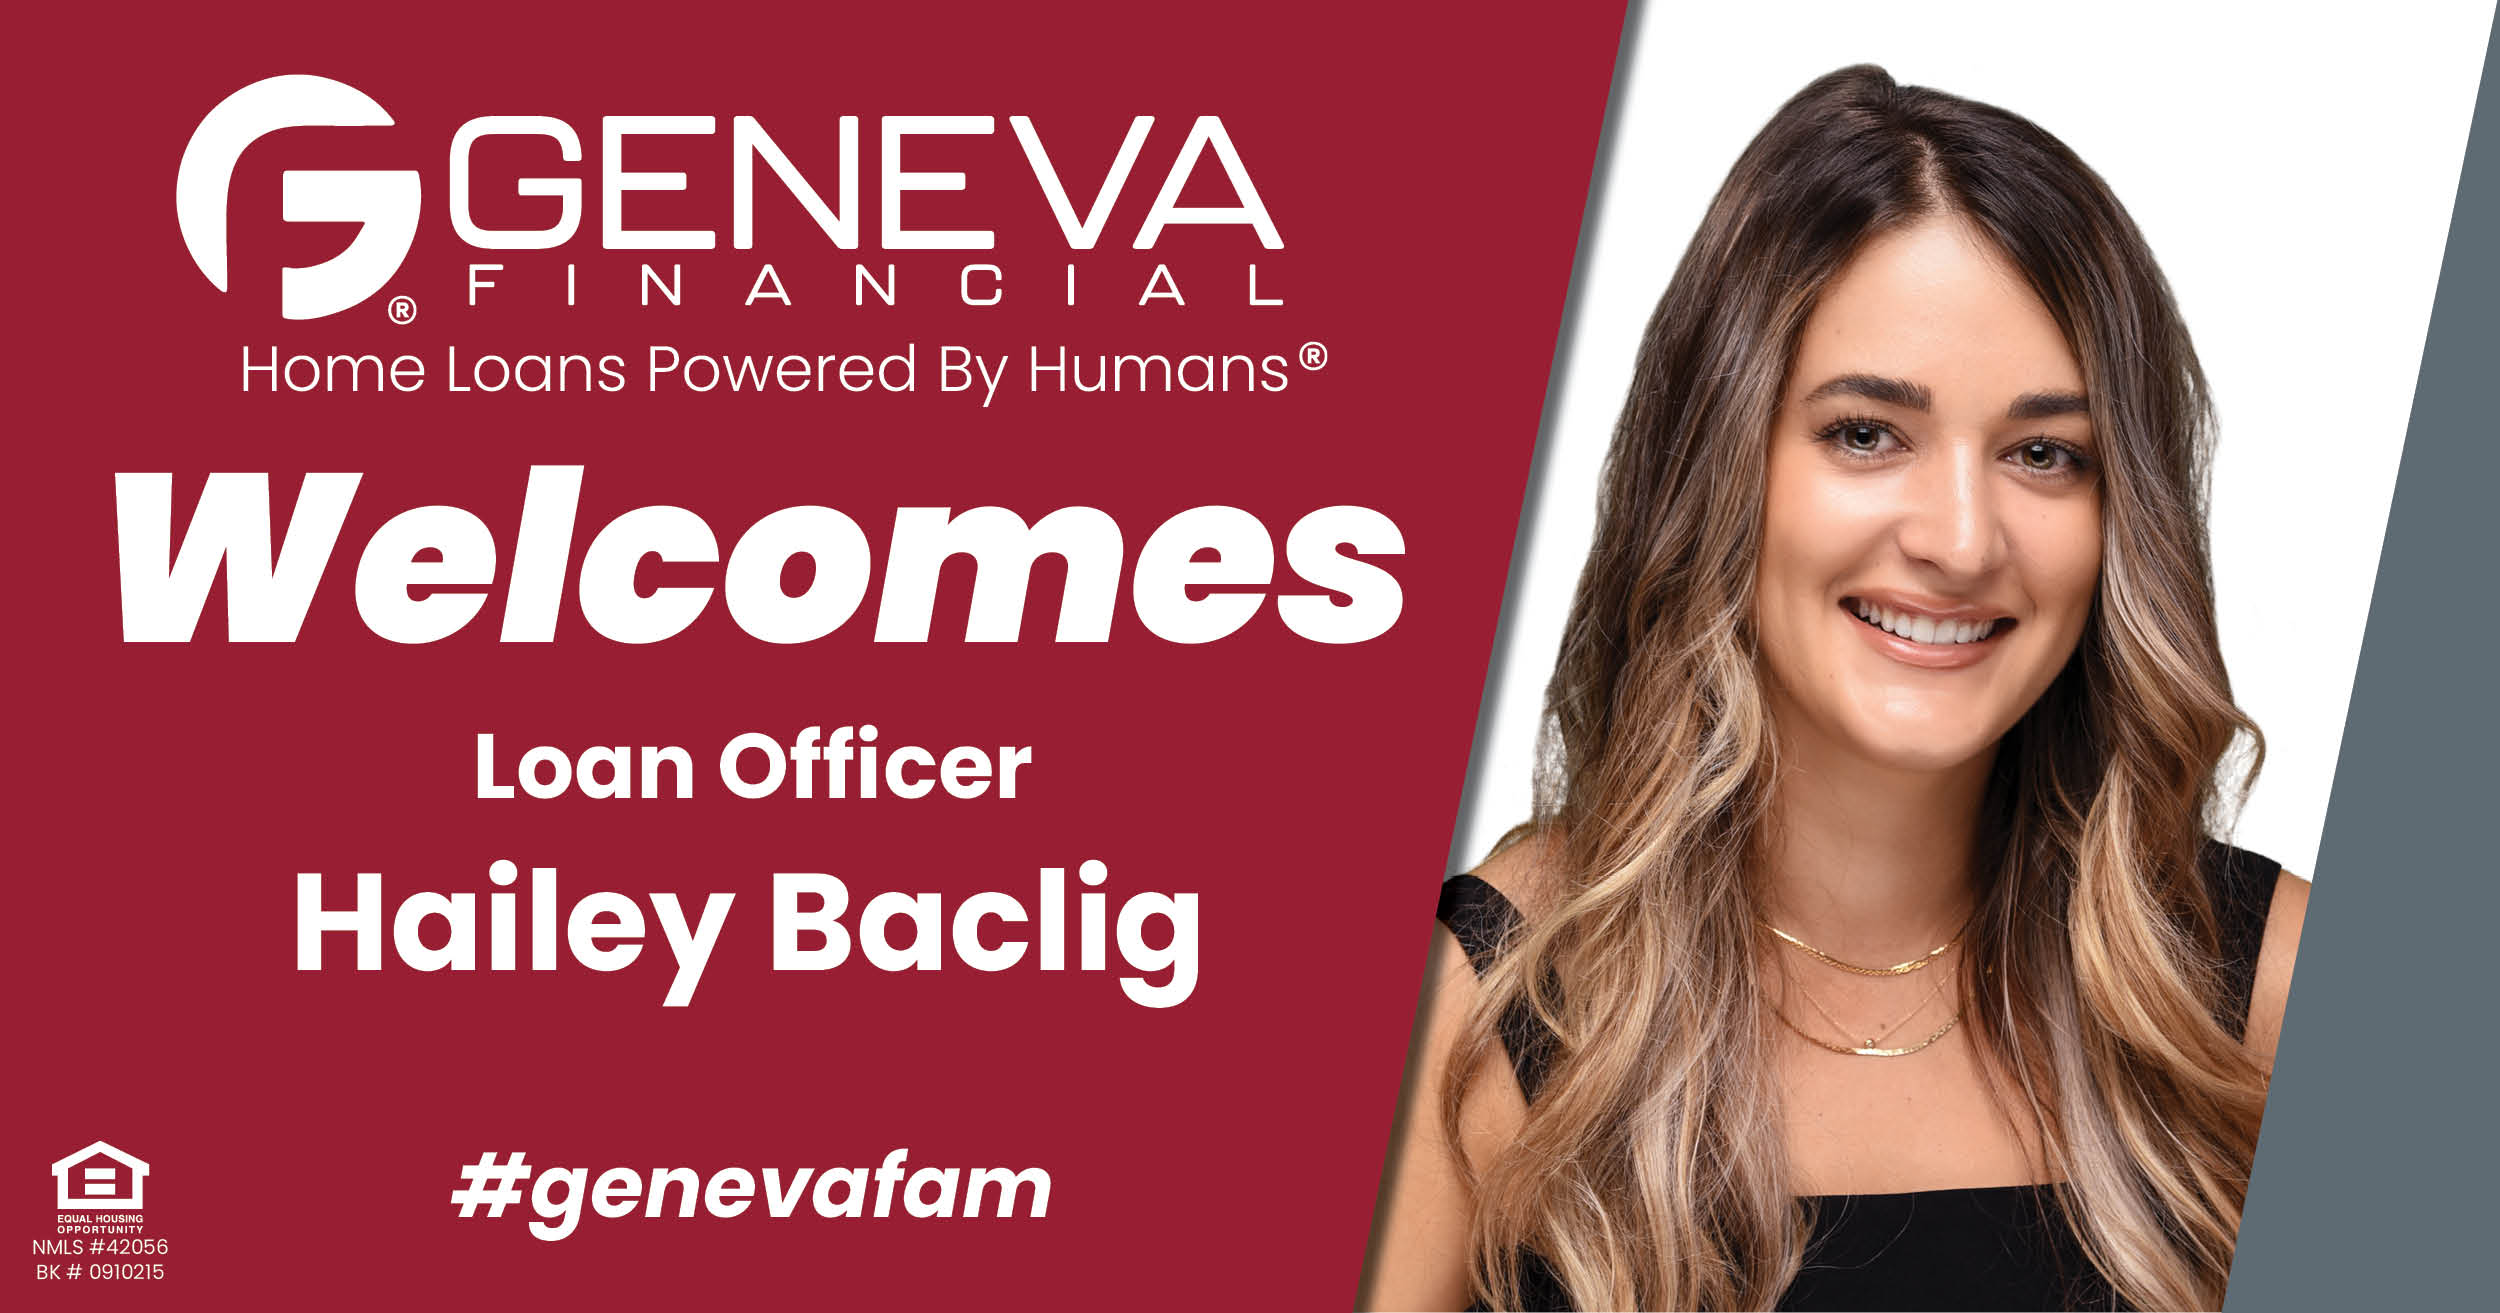 Geneva Financial Welcomes New Loan Officer Hailey Baclig to the state of Hawaii – Home Loans Powered by Humans®.